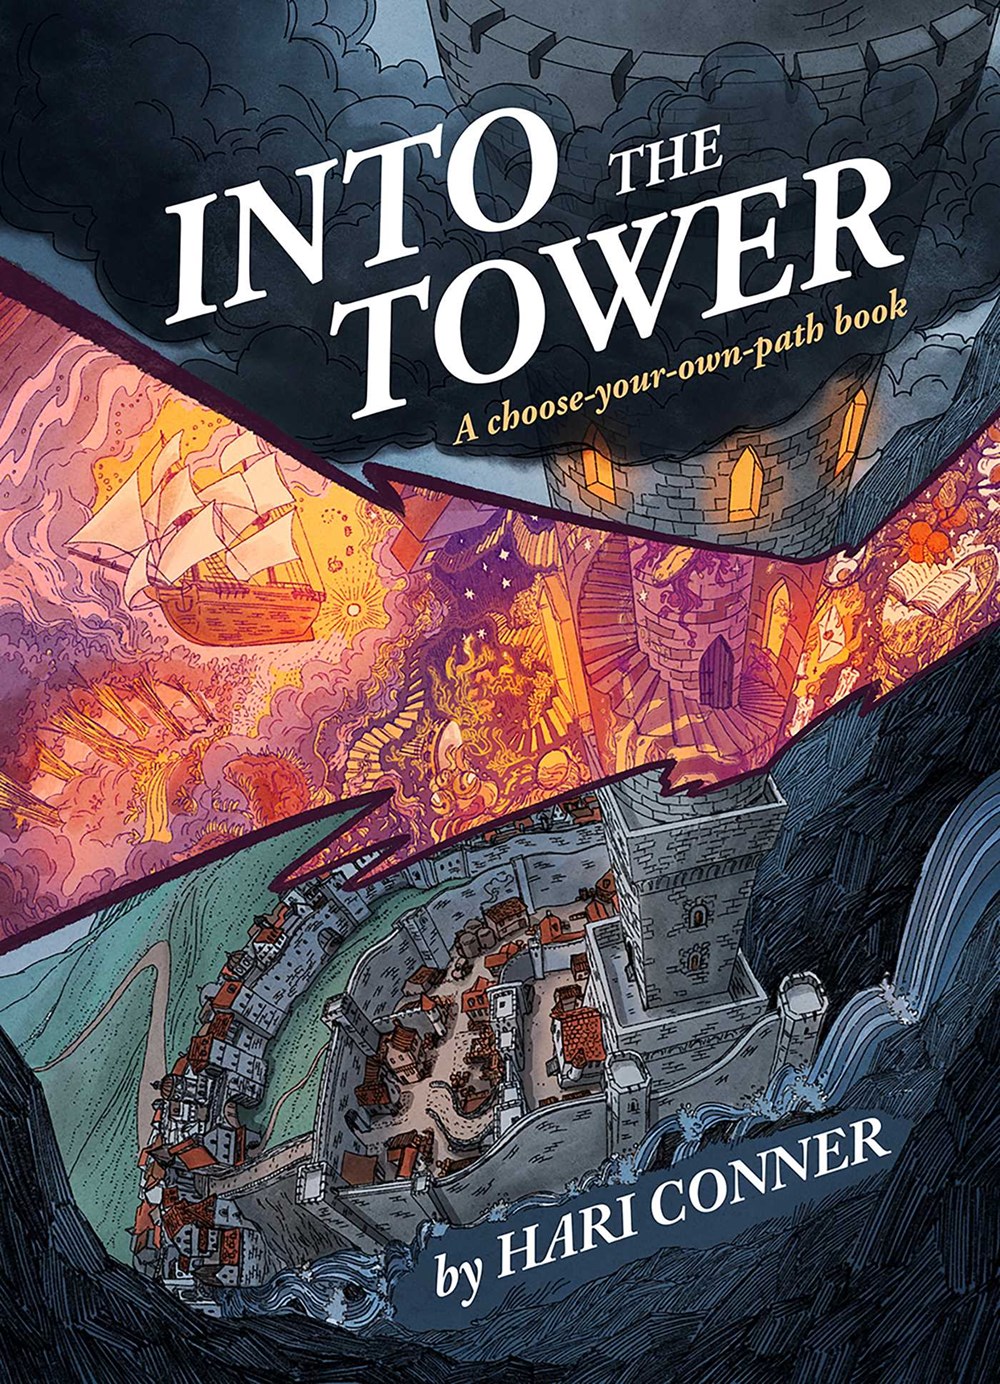 Into the Tower